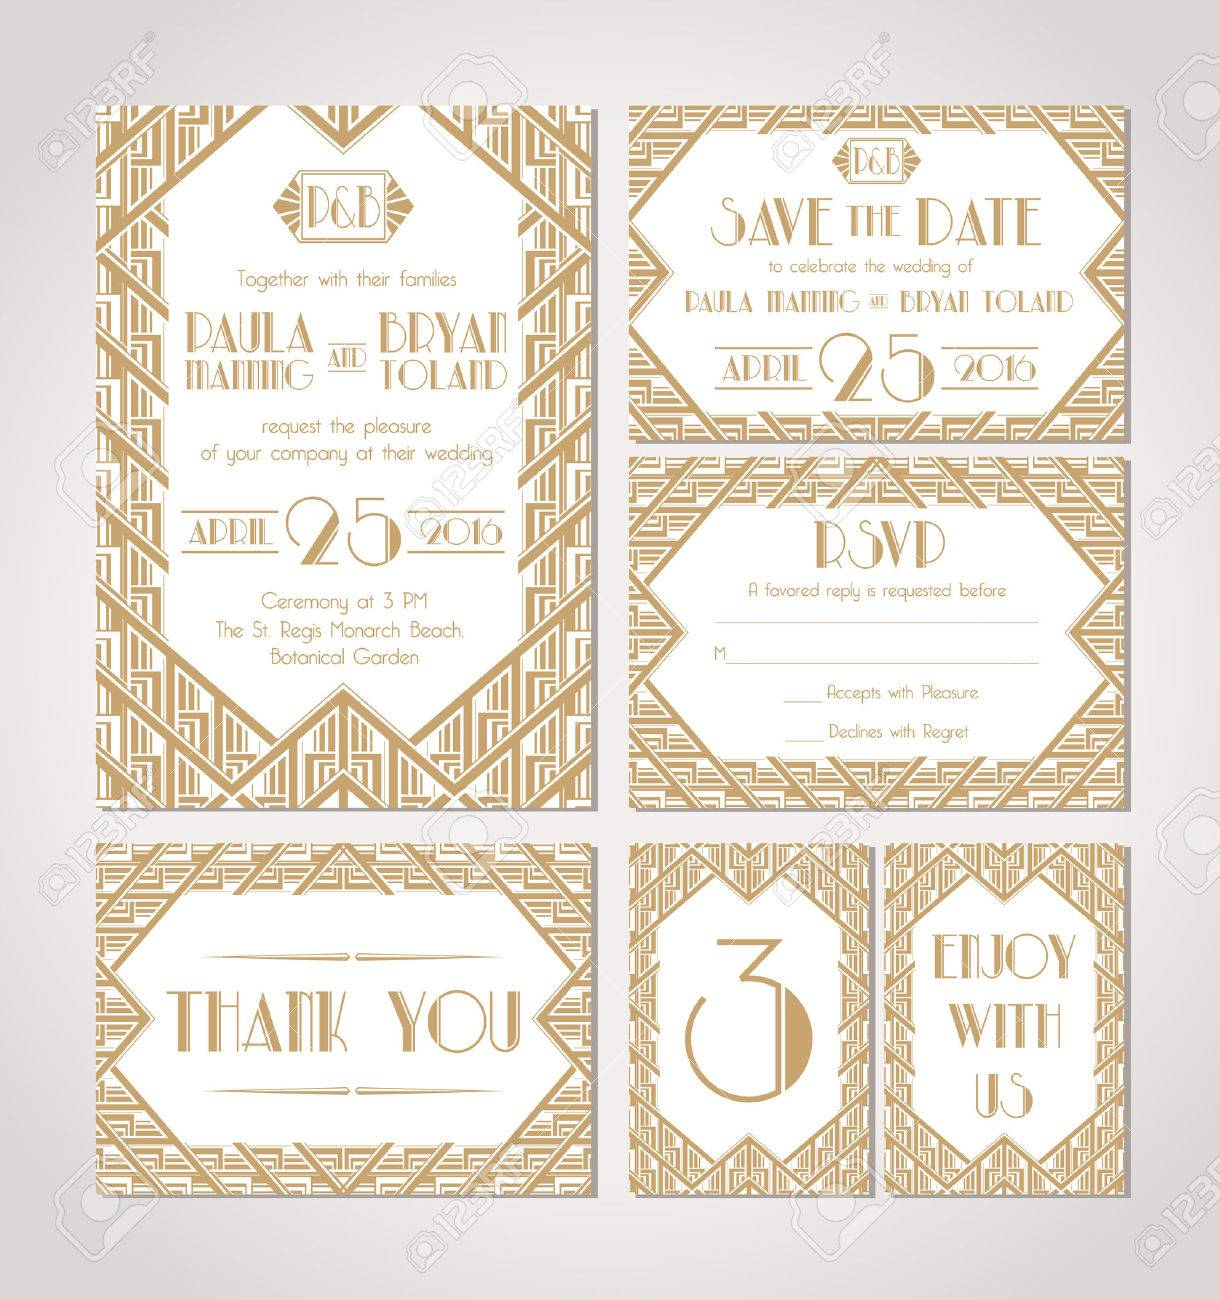 Art Deco Wedding Invitation Template Save The Date Royalty Free in proportions 1220 X 1300